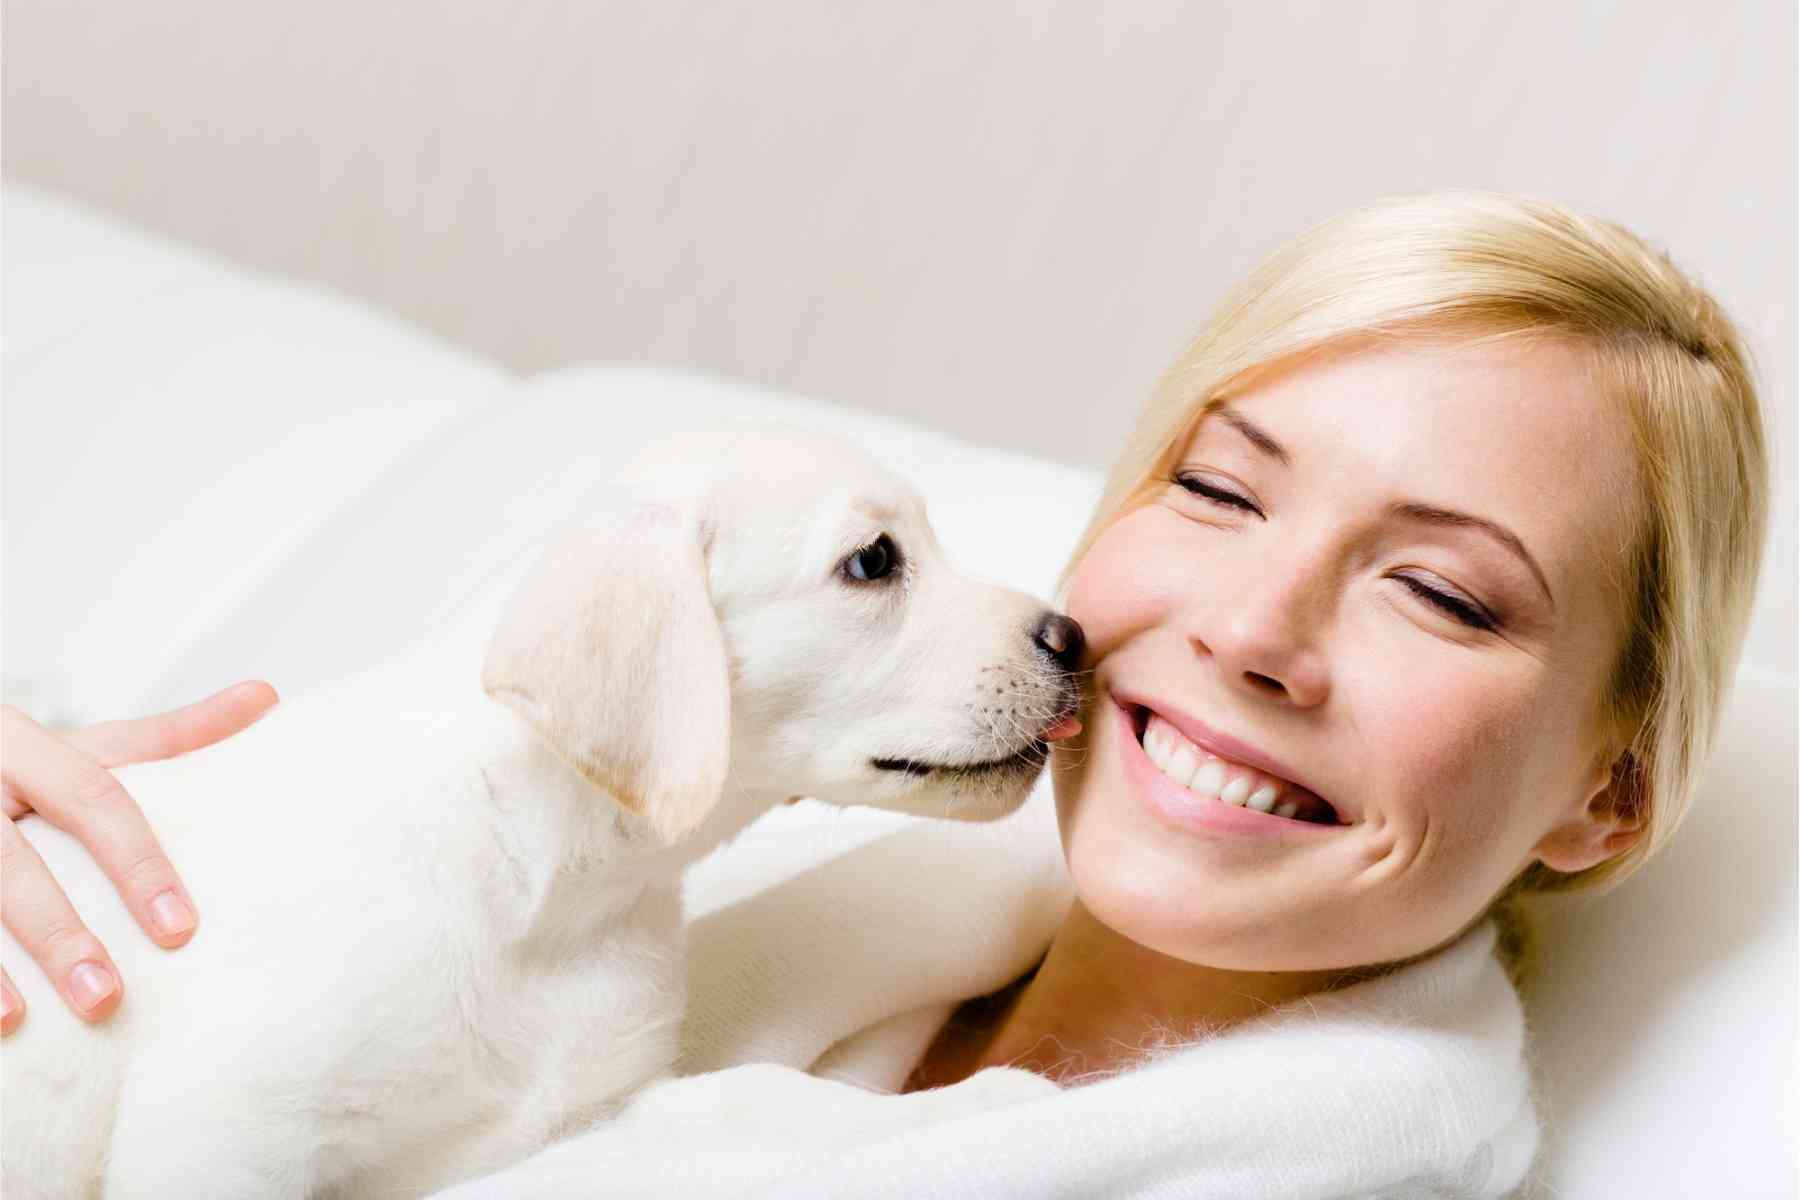 Puppy licking beautiful blonde woman's face